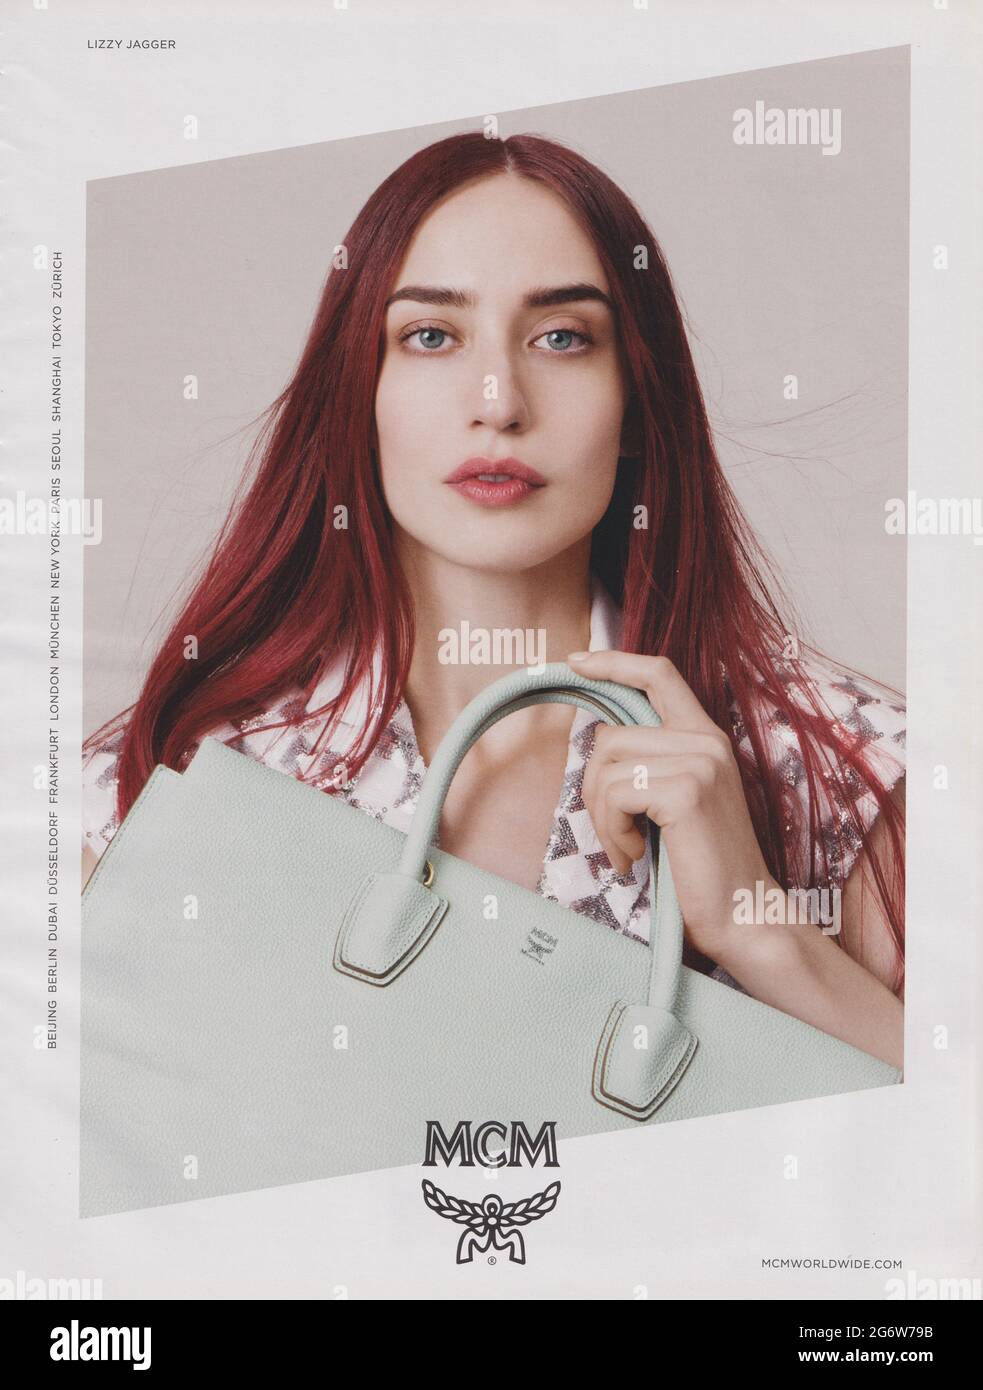 poster advertising MCM fashion house with Lizzy Jagger in magazine from 2015, advertisement, creative MCM 2010s advert Stock Photo